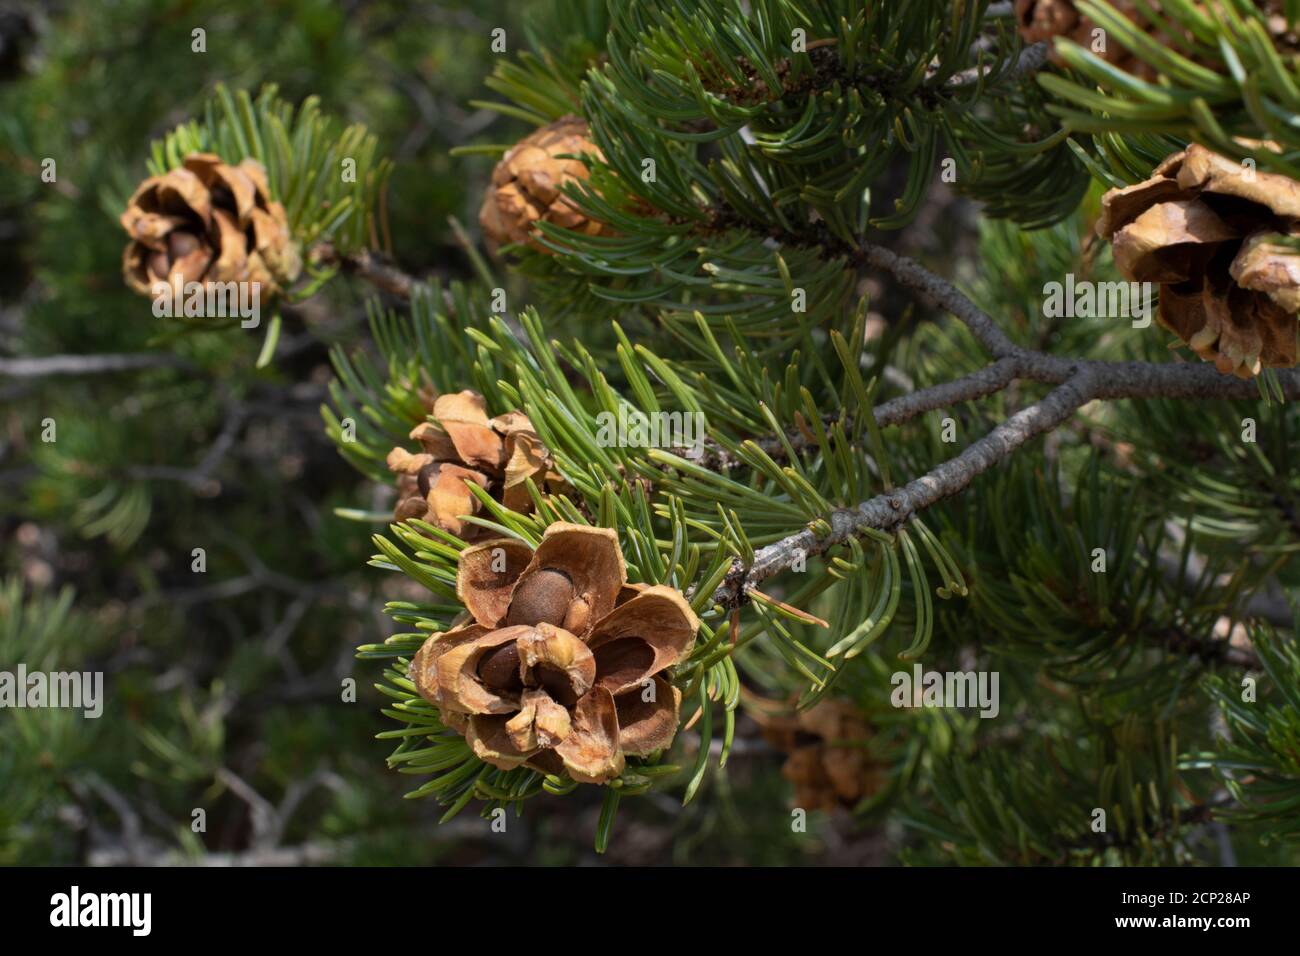 Pinon-bearing pine cones on a pinon, or Pinyon pine tree in the American Southwest. Stock Photo